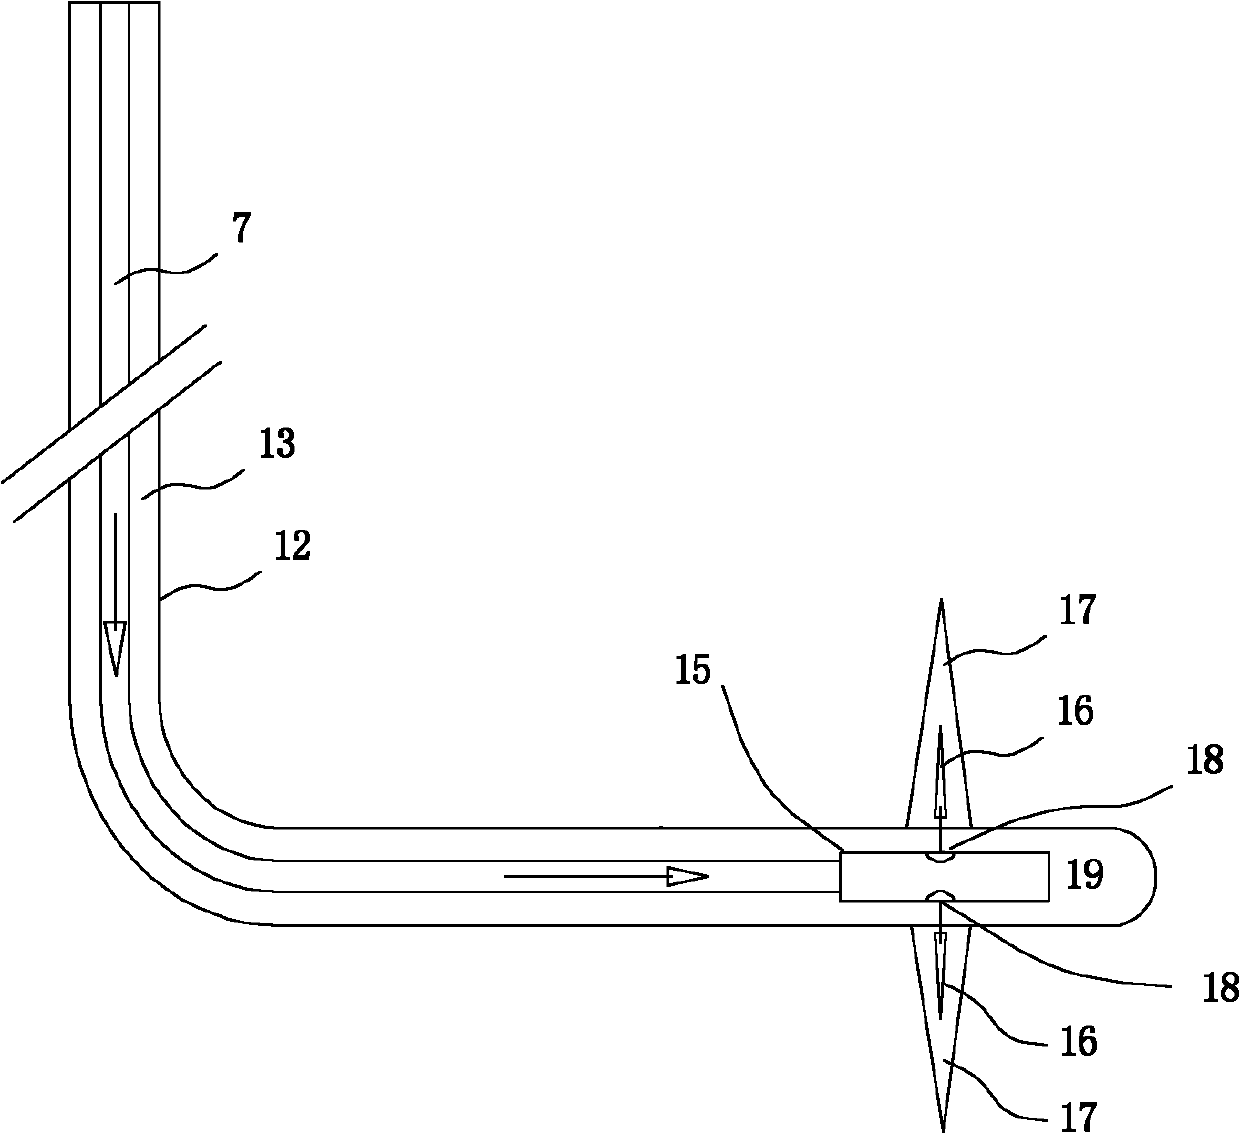 Coiled tubing supercritical CO2 jet fracturing method